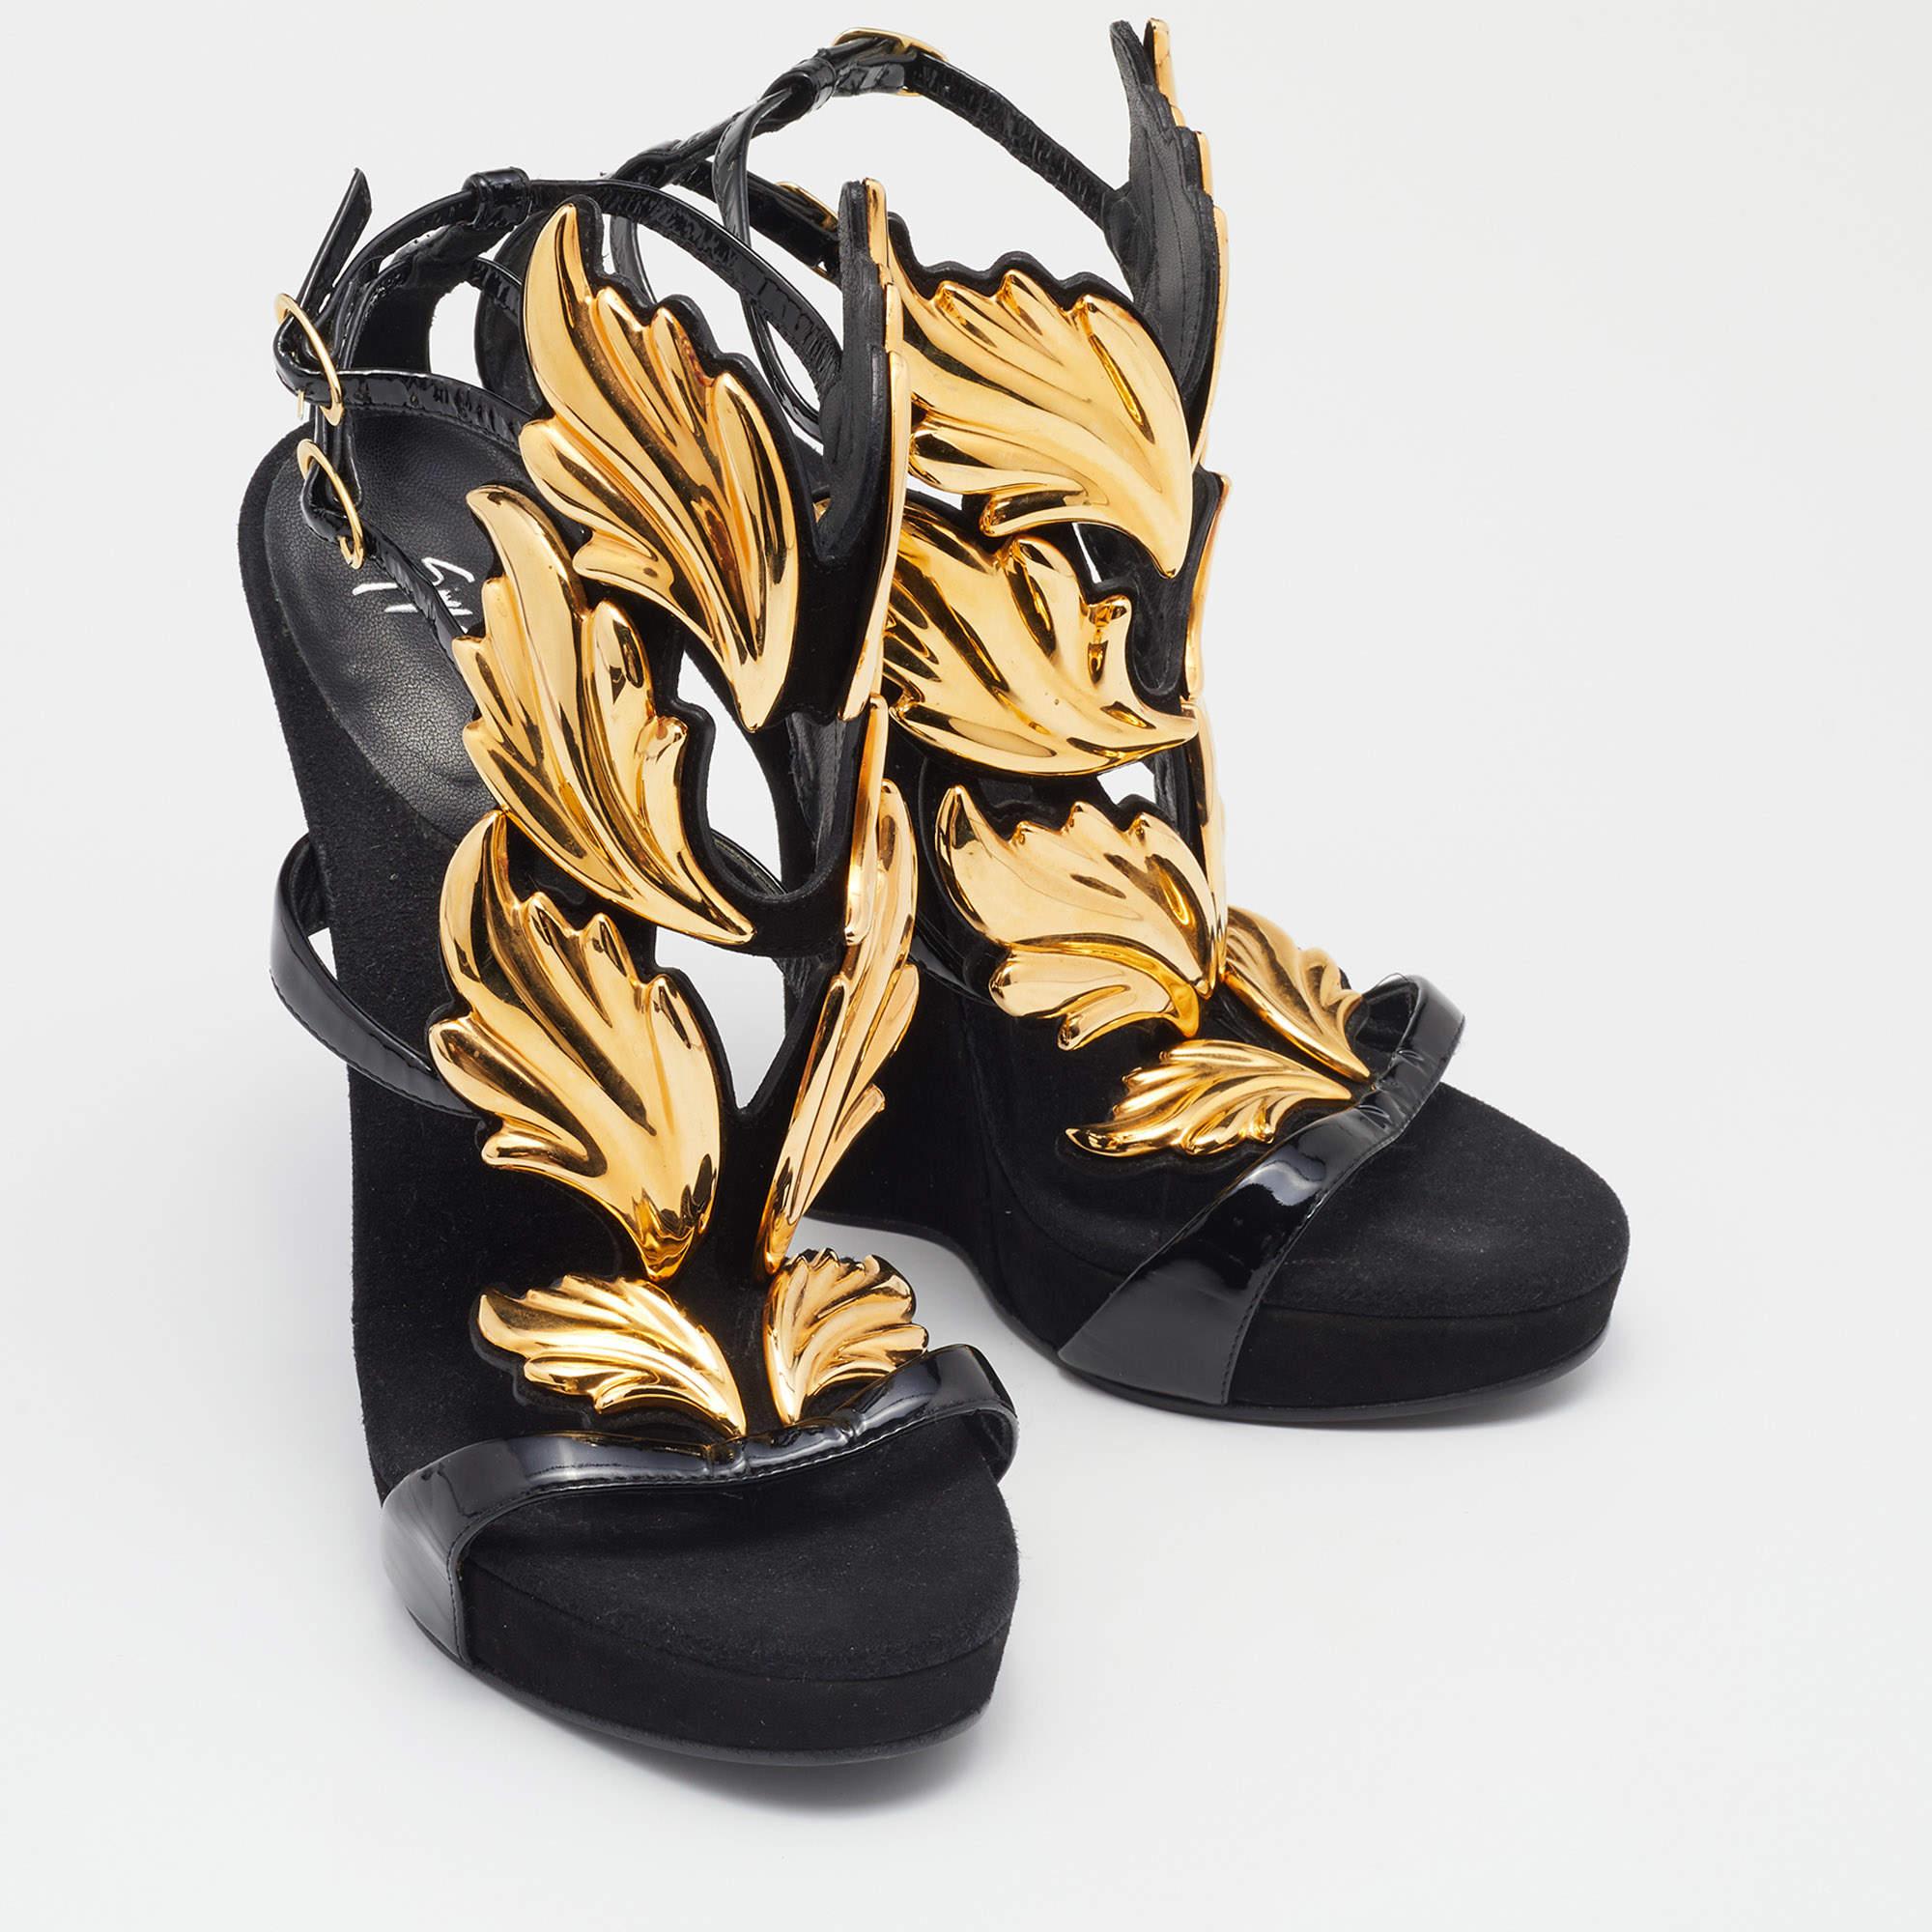 Giuseppe Zanotti Black/Gold Patent Leather and Suede Cruel Summer Sandals Size 3 1